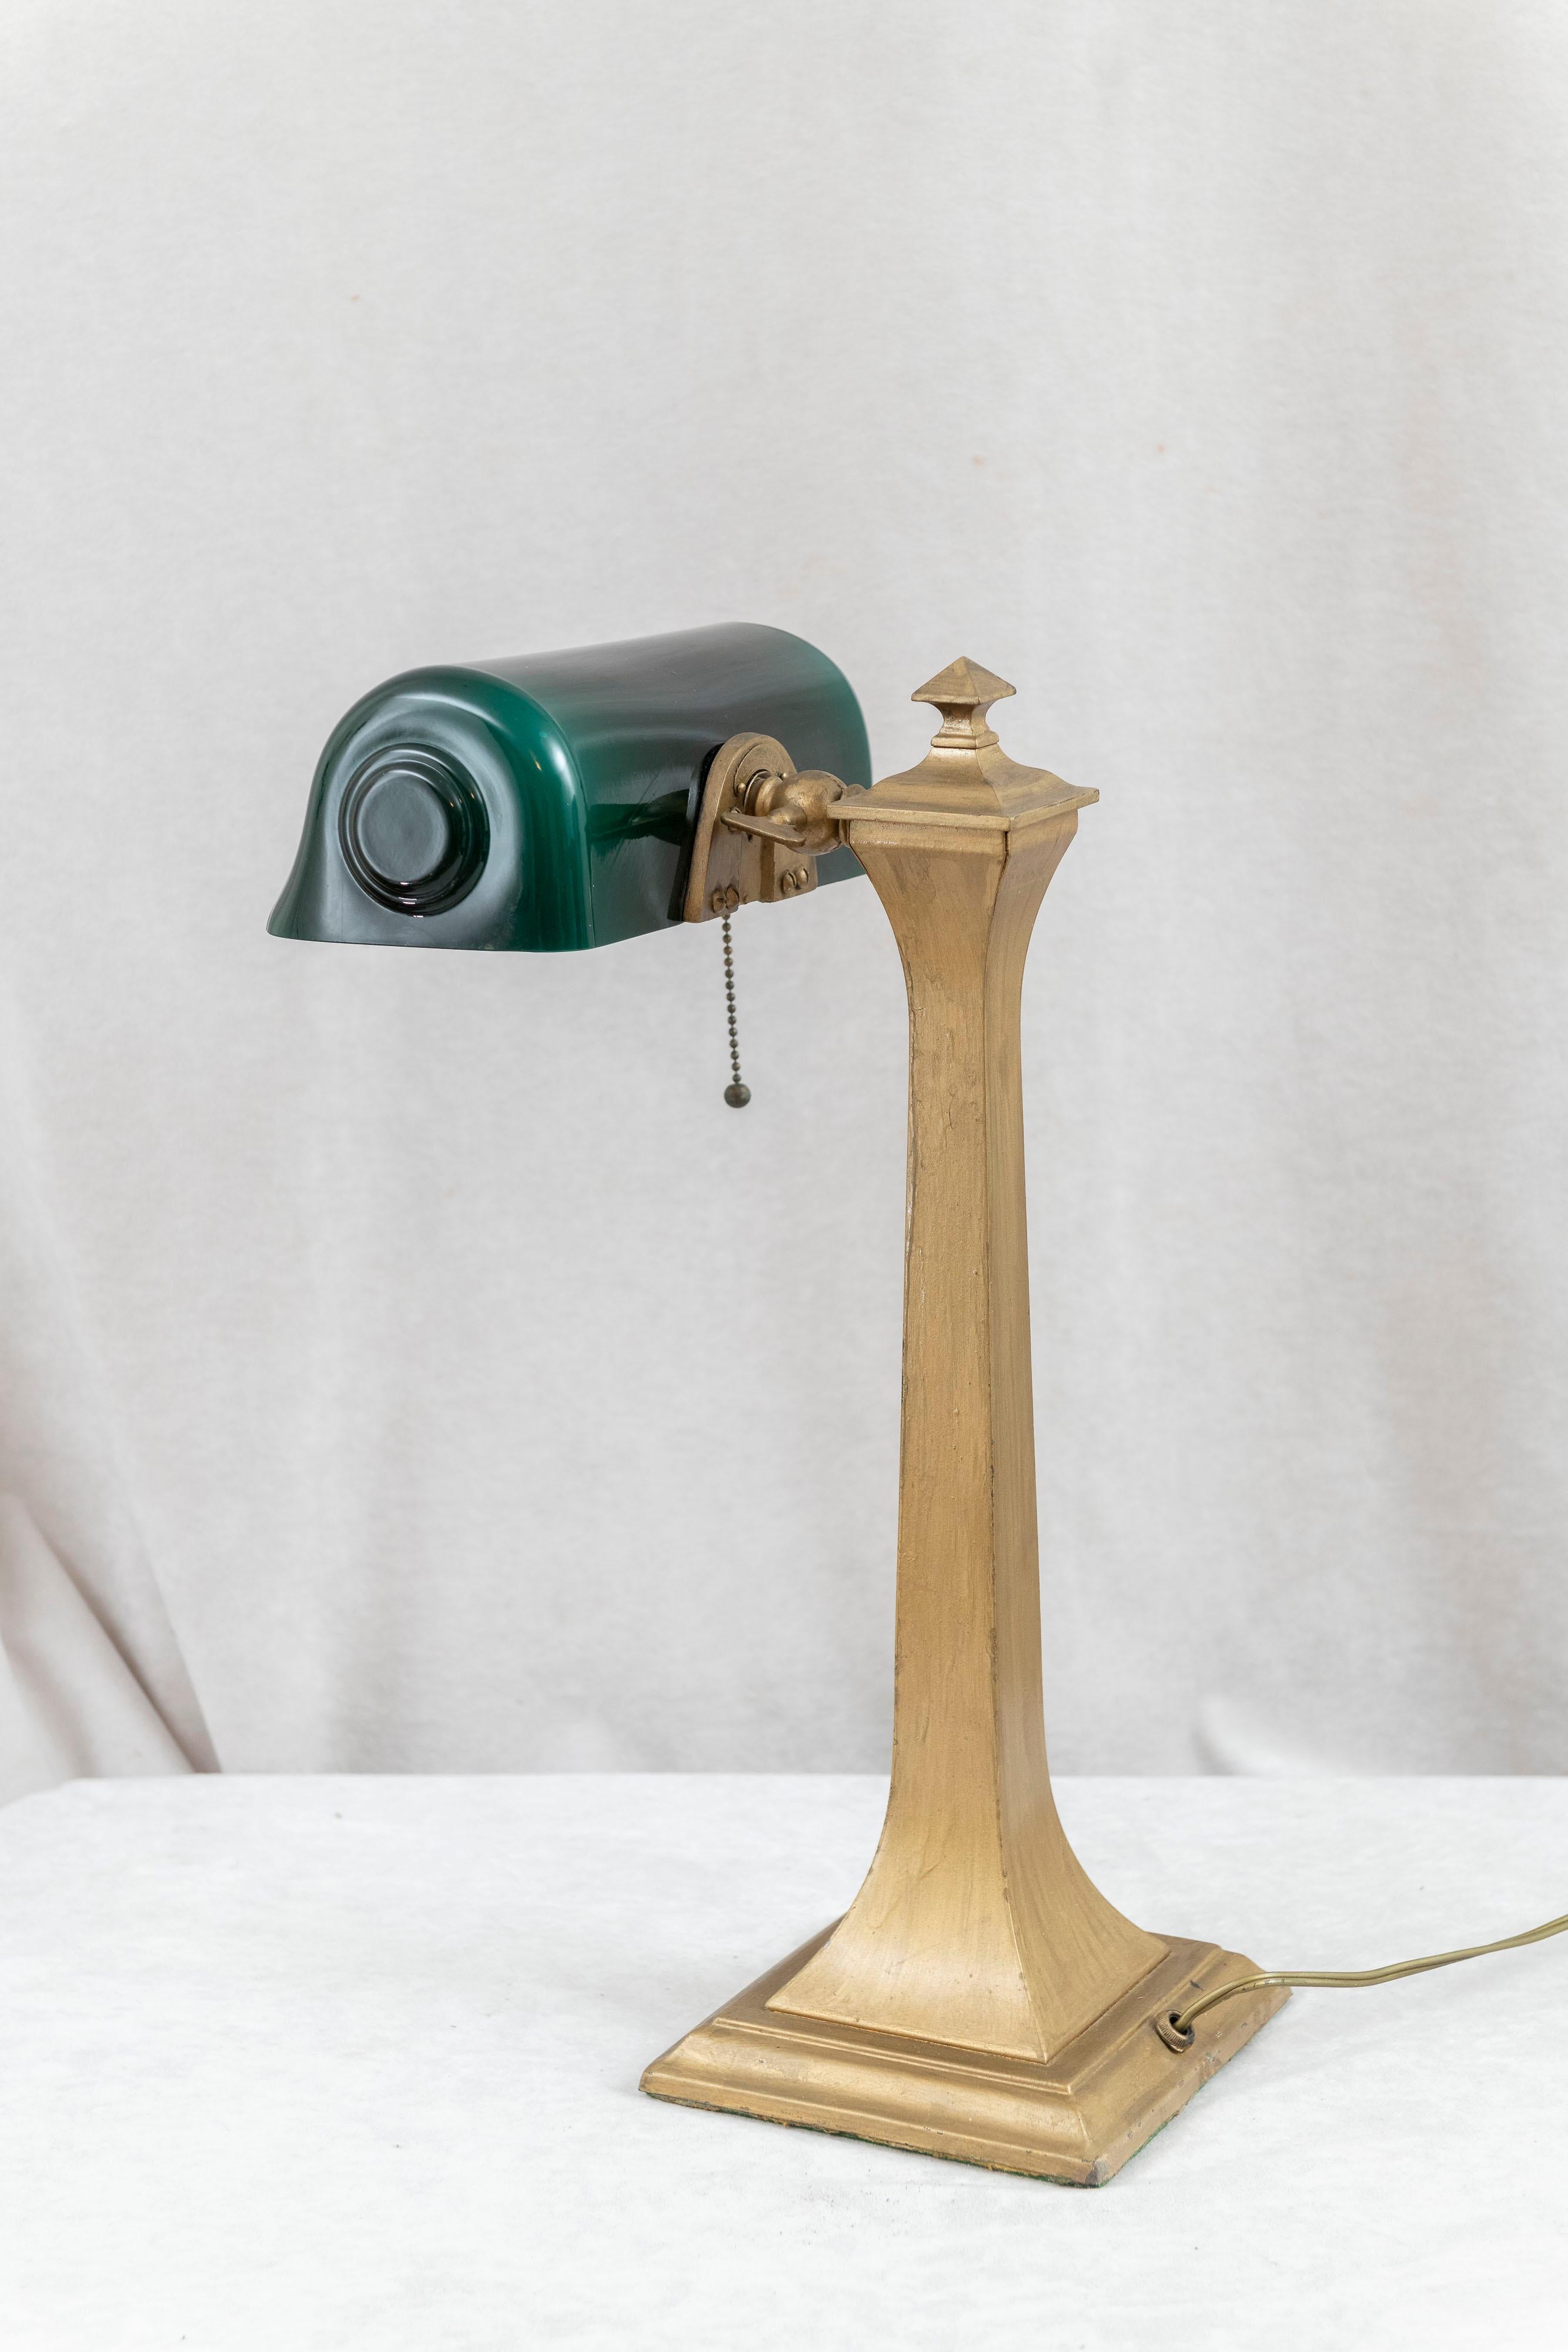 Early 20th Century Antique Banker's Desk Lamp by Verdelite, Original Green Shade, ca. 1917